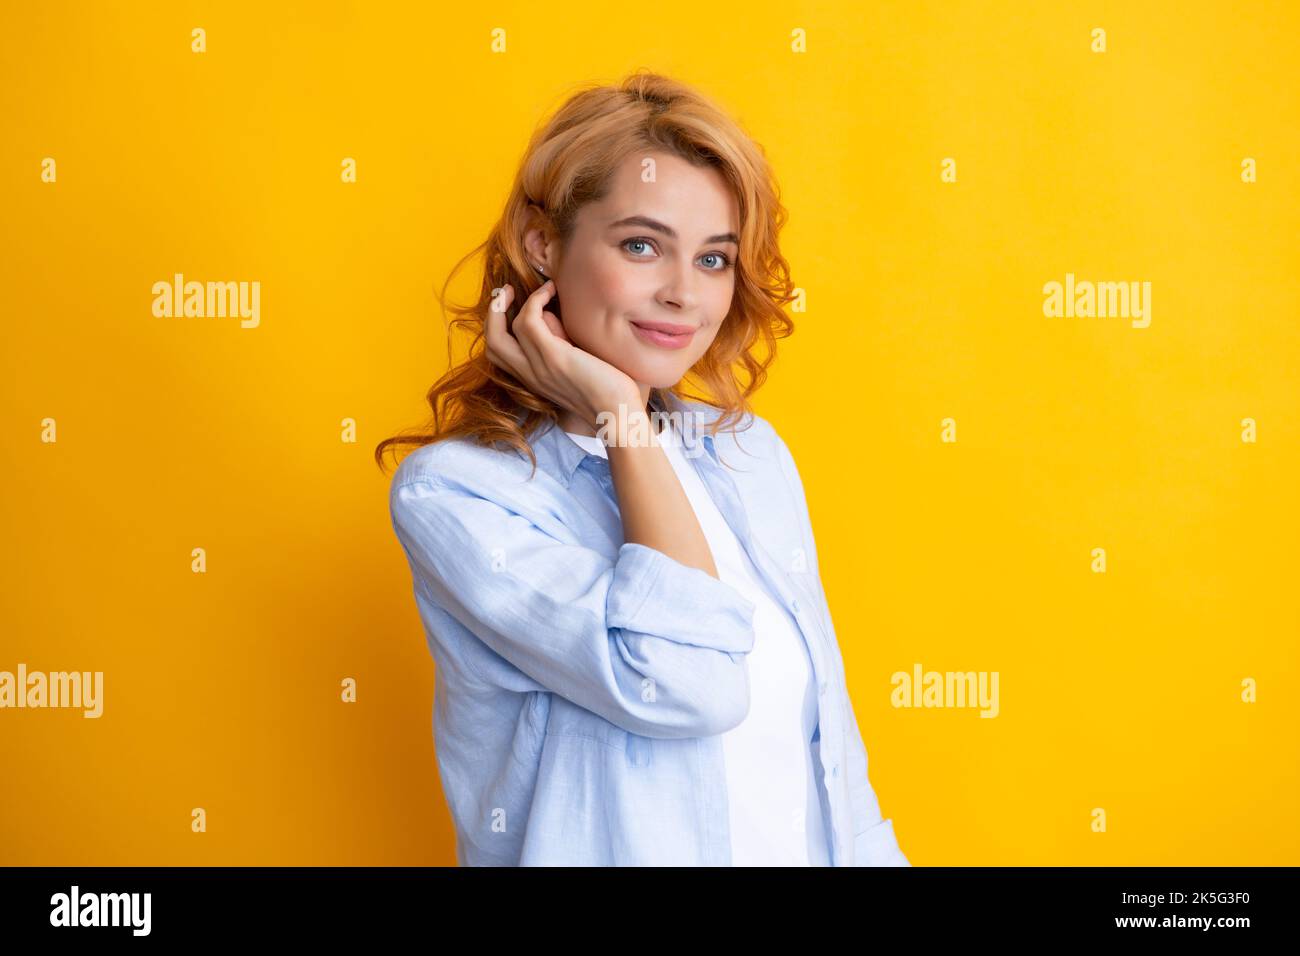 Redhead woman portrait. Female model face. Beautiful redhead woman smiles cheerfully isolated on yellow background. Stock Photo